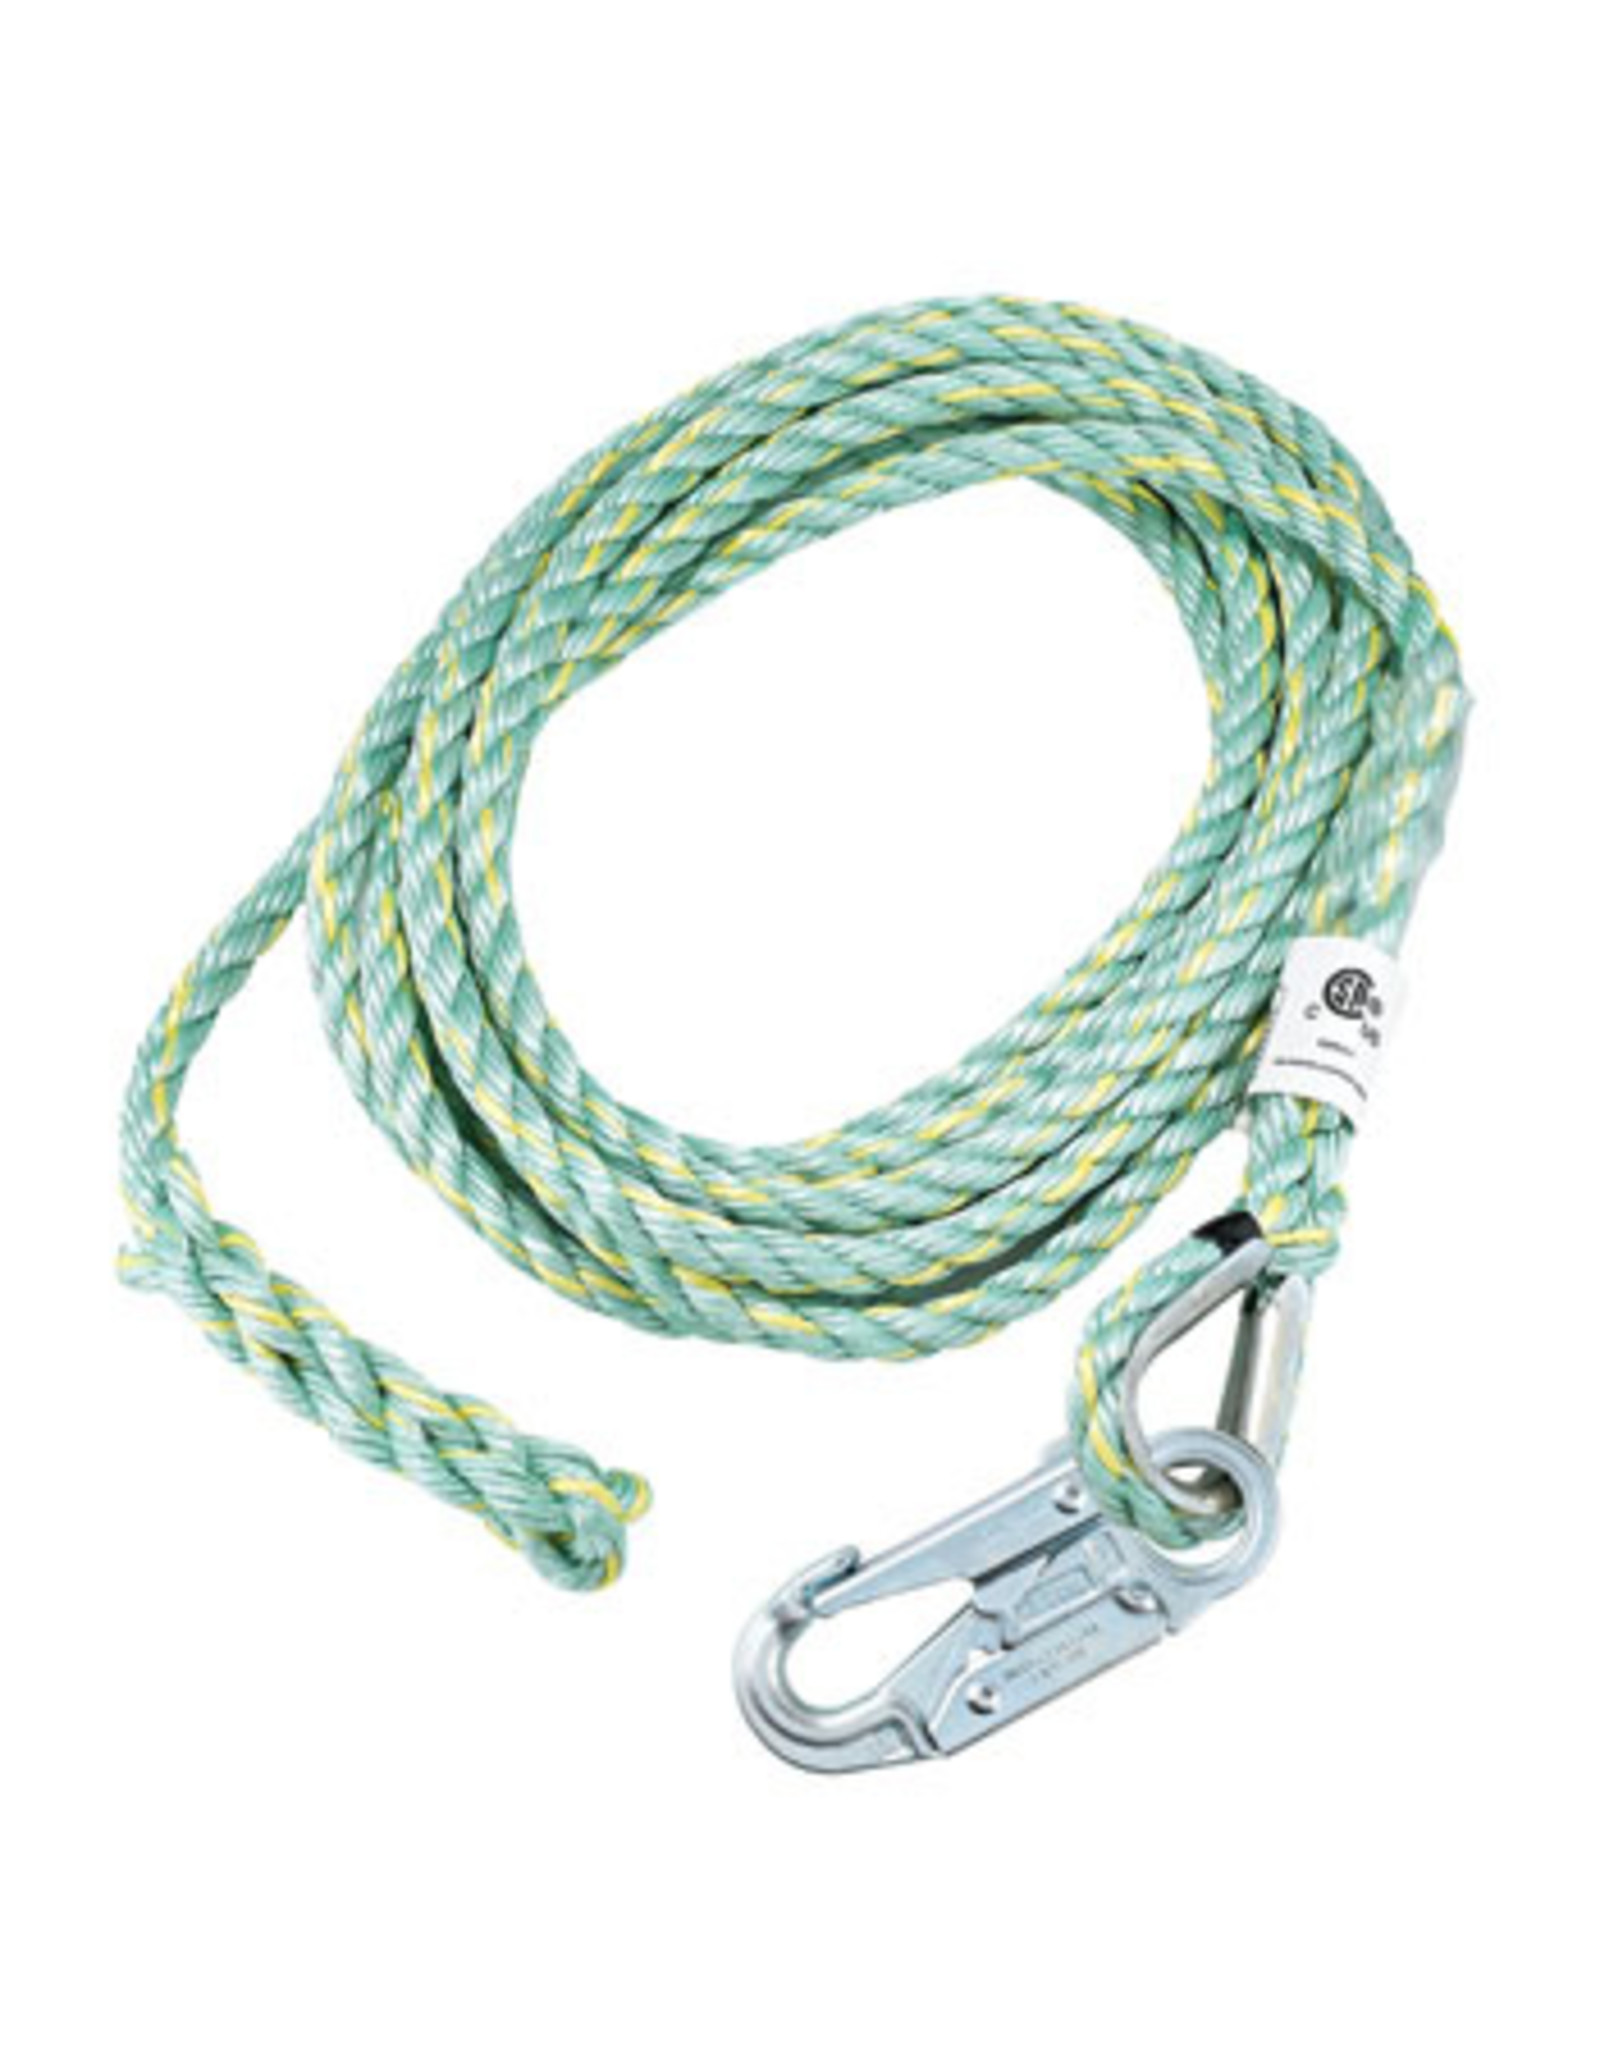 Co-Polymer Blend Rope 5/8 in (16mm) 3 strand rope for vertical lifeline, comes with 1 termination and 1 snap hook with 3/4 in opening Model FP6650HS. Length 25ft